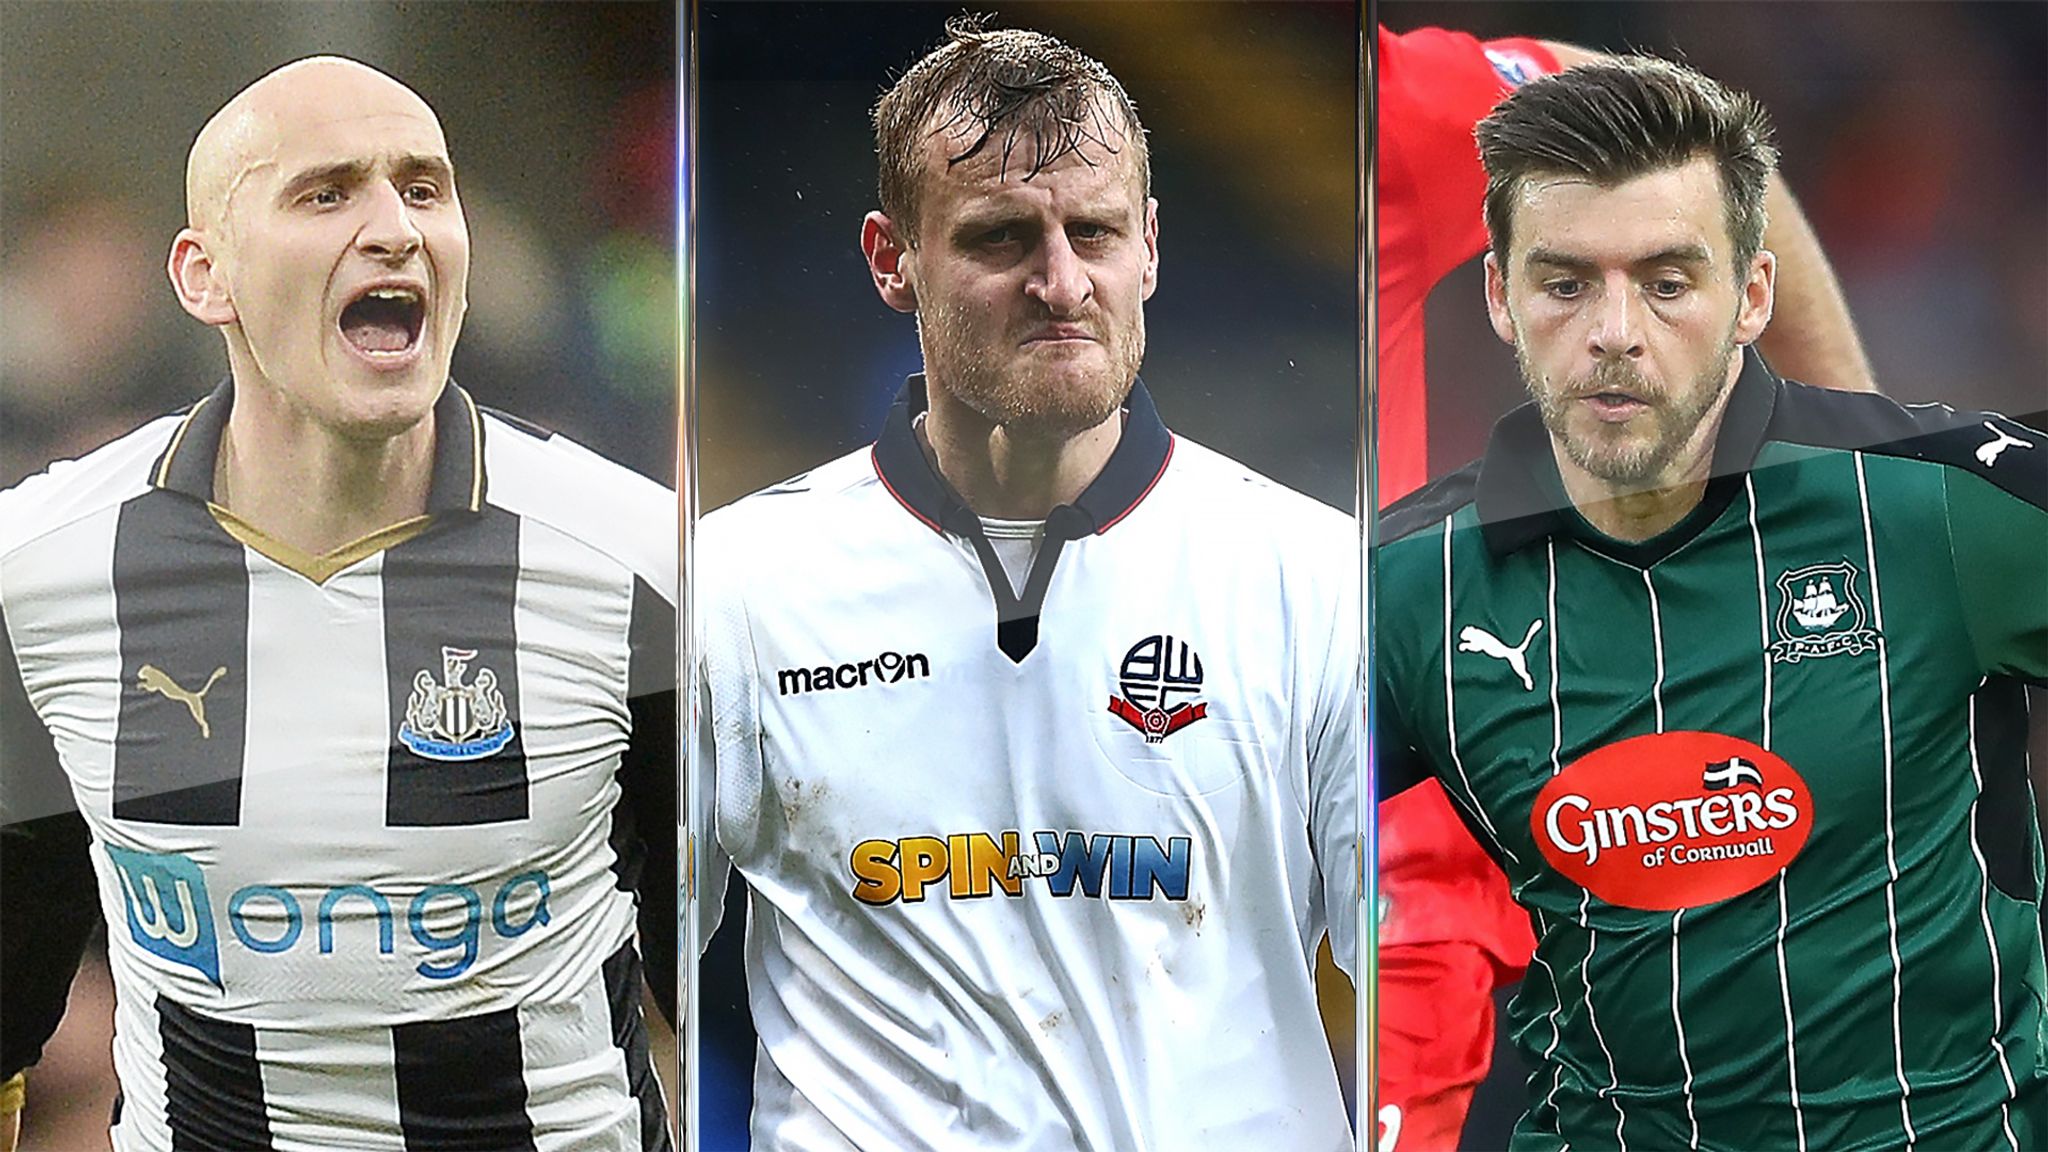 EFL teams of the season announced for the Sky Bet Championship, League One  and League Two, Football News